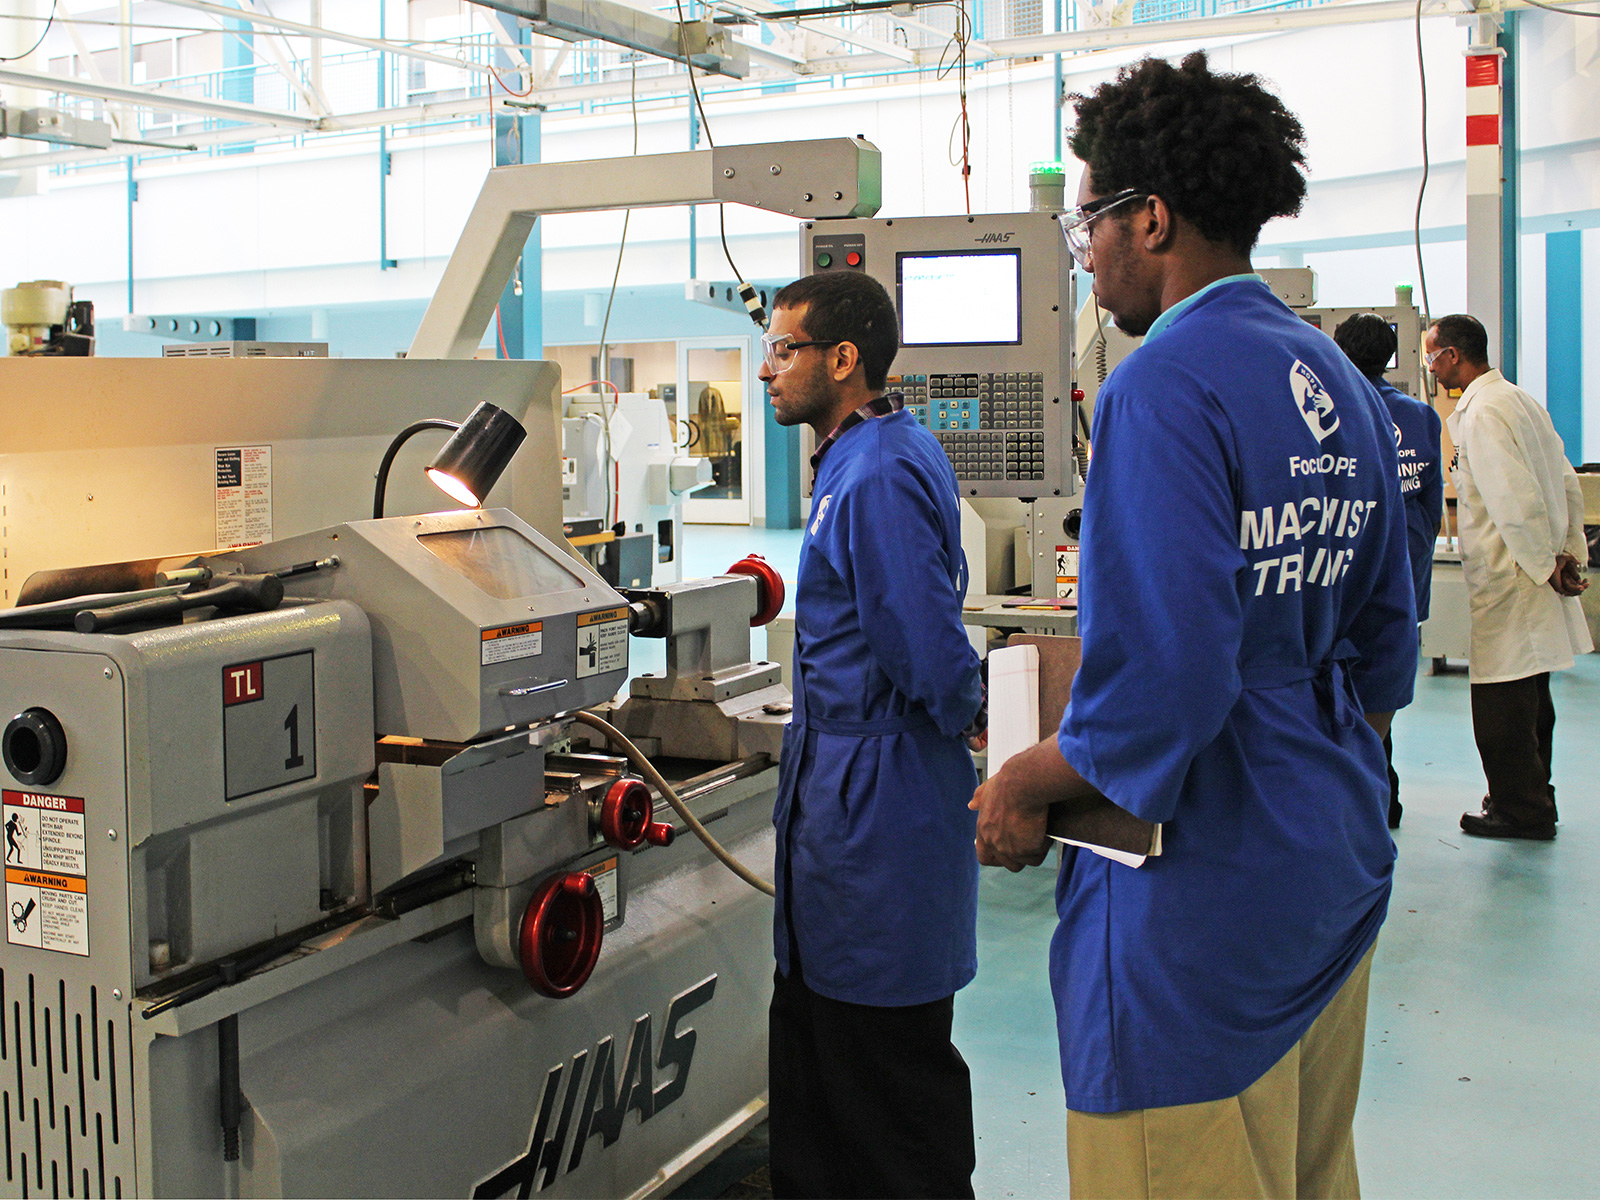 Young Men Operate Machinery at Training Center